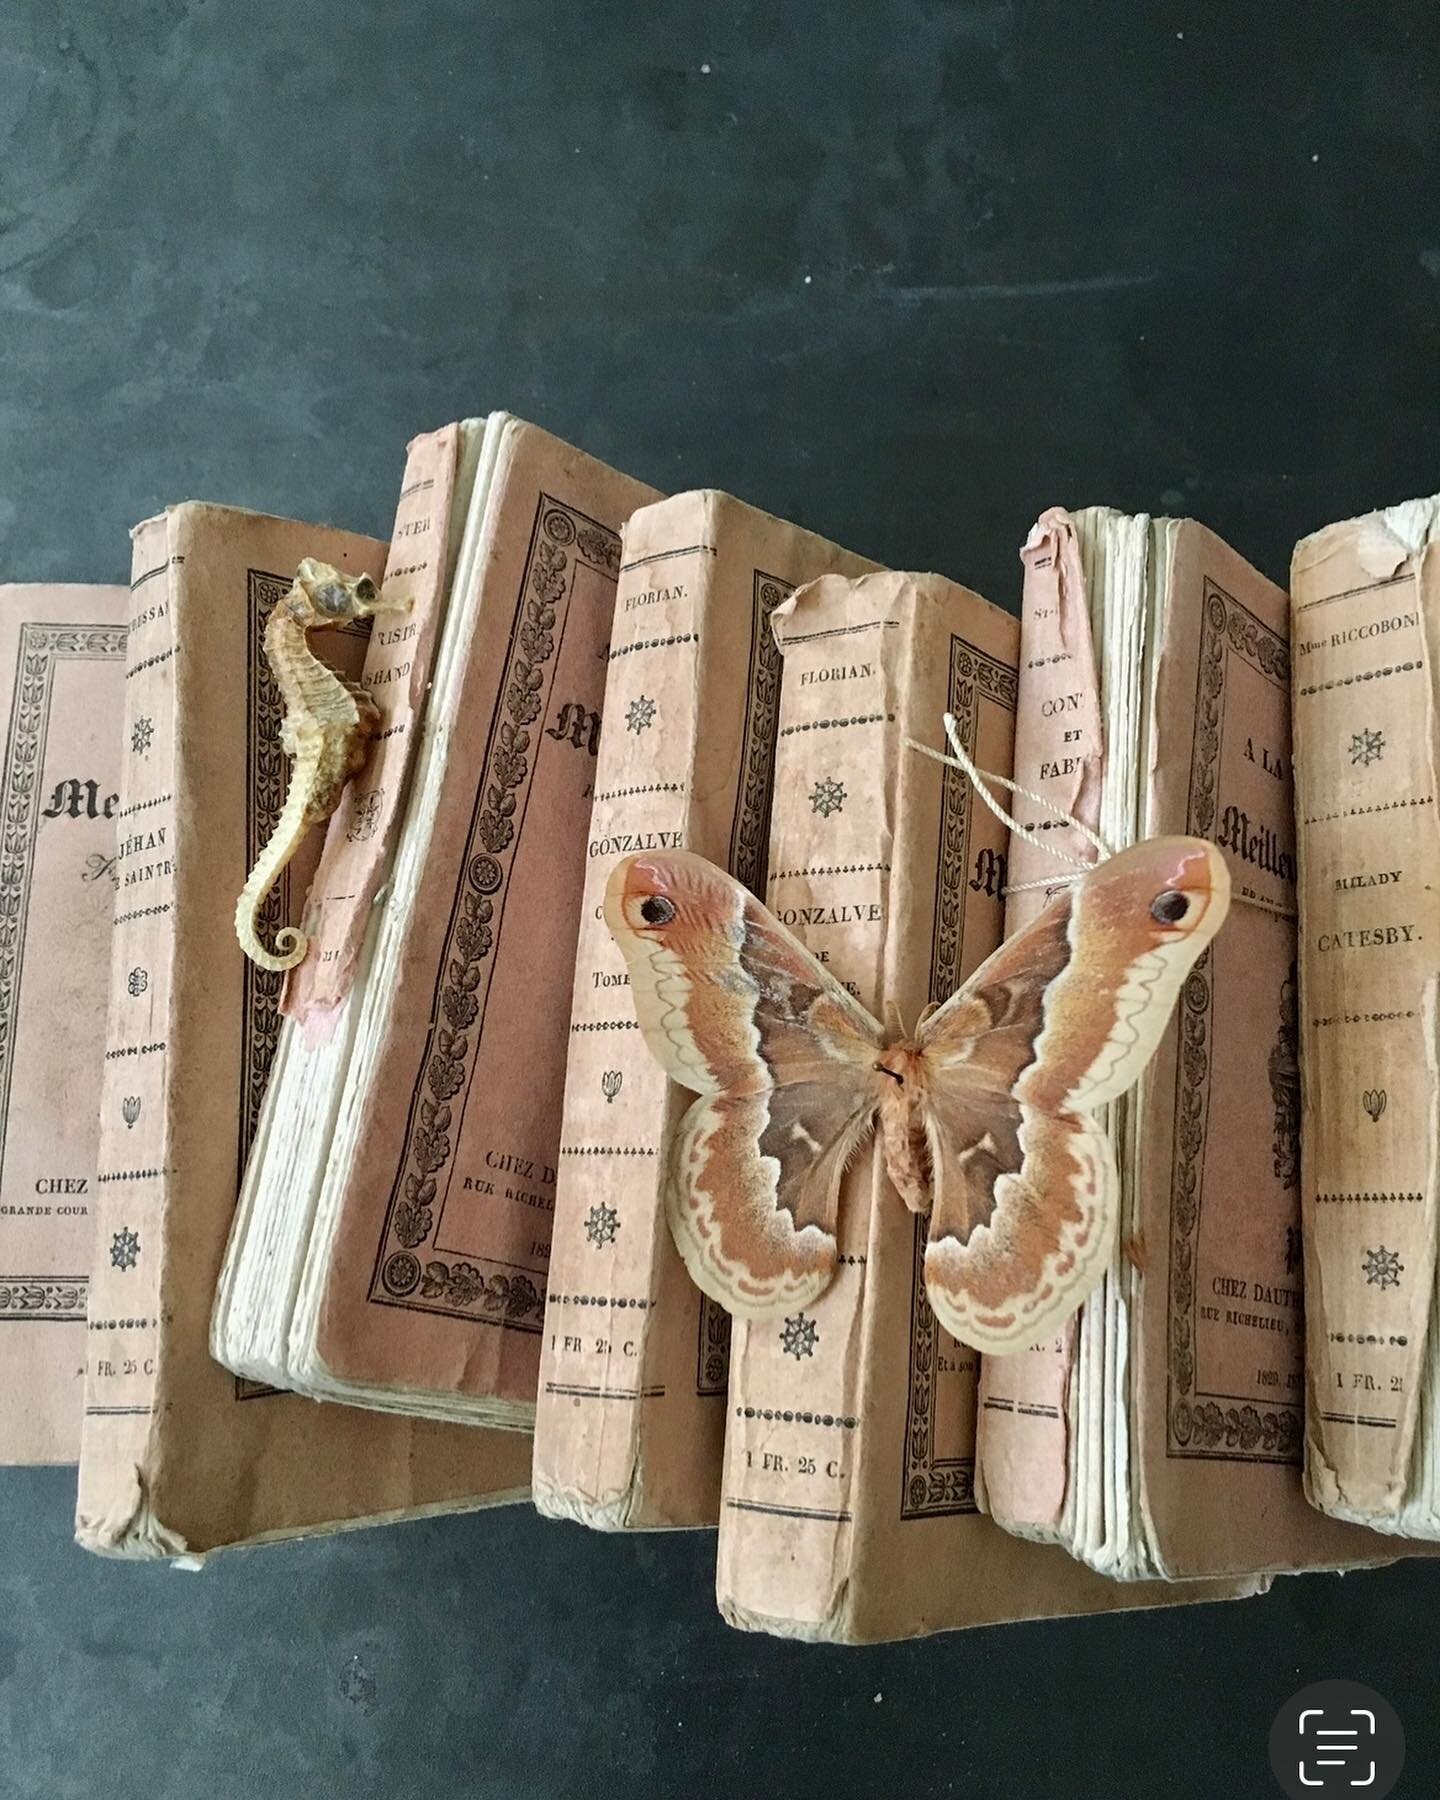 A favorite of mine with everything I love #seahorse #literature #moth #texture #patina #ephemera #history #bookbinding #foundobjects #composition #nature #artcurator #stilllifephoto